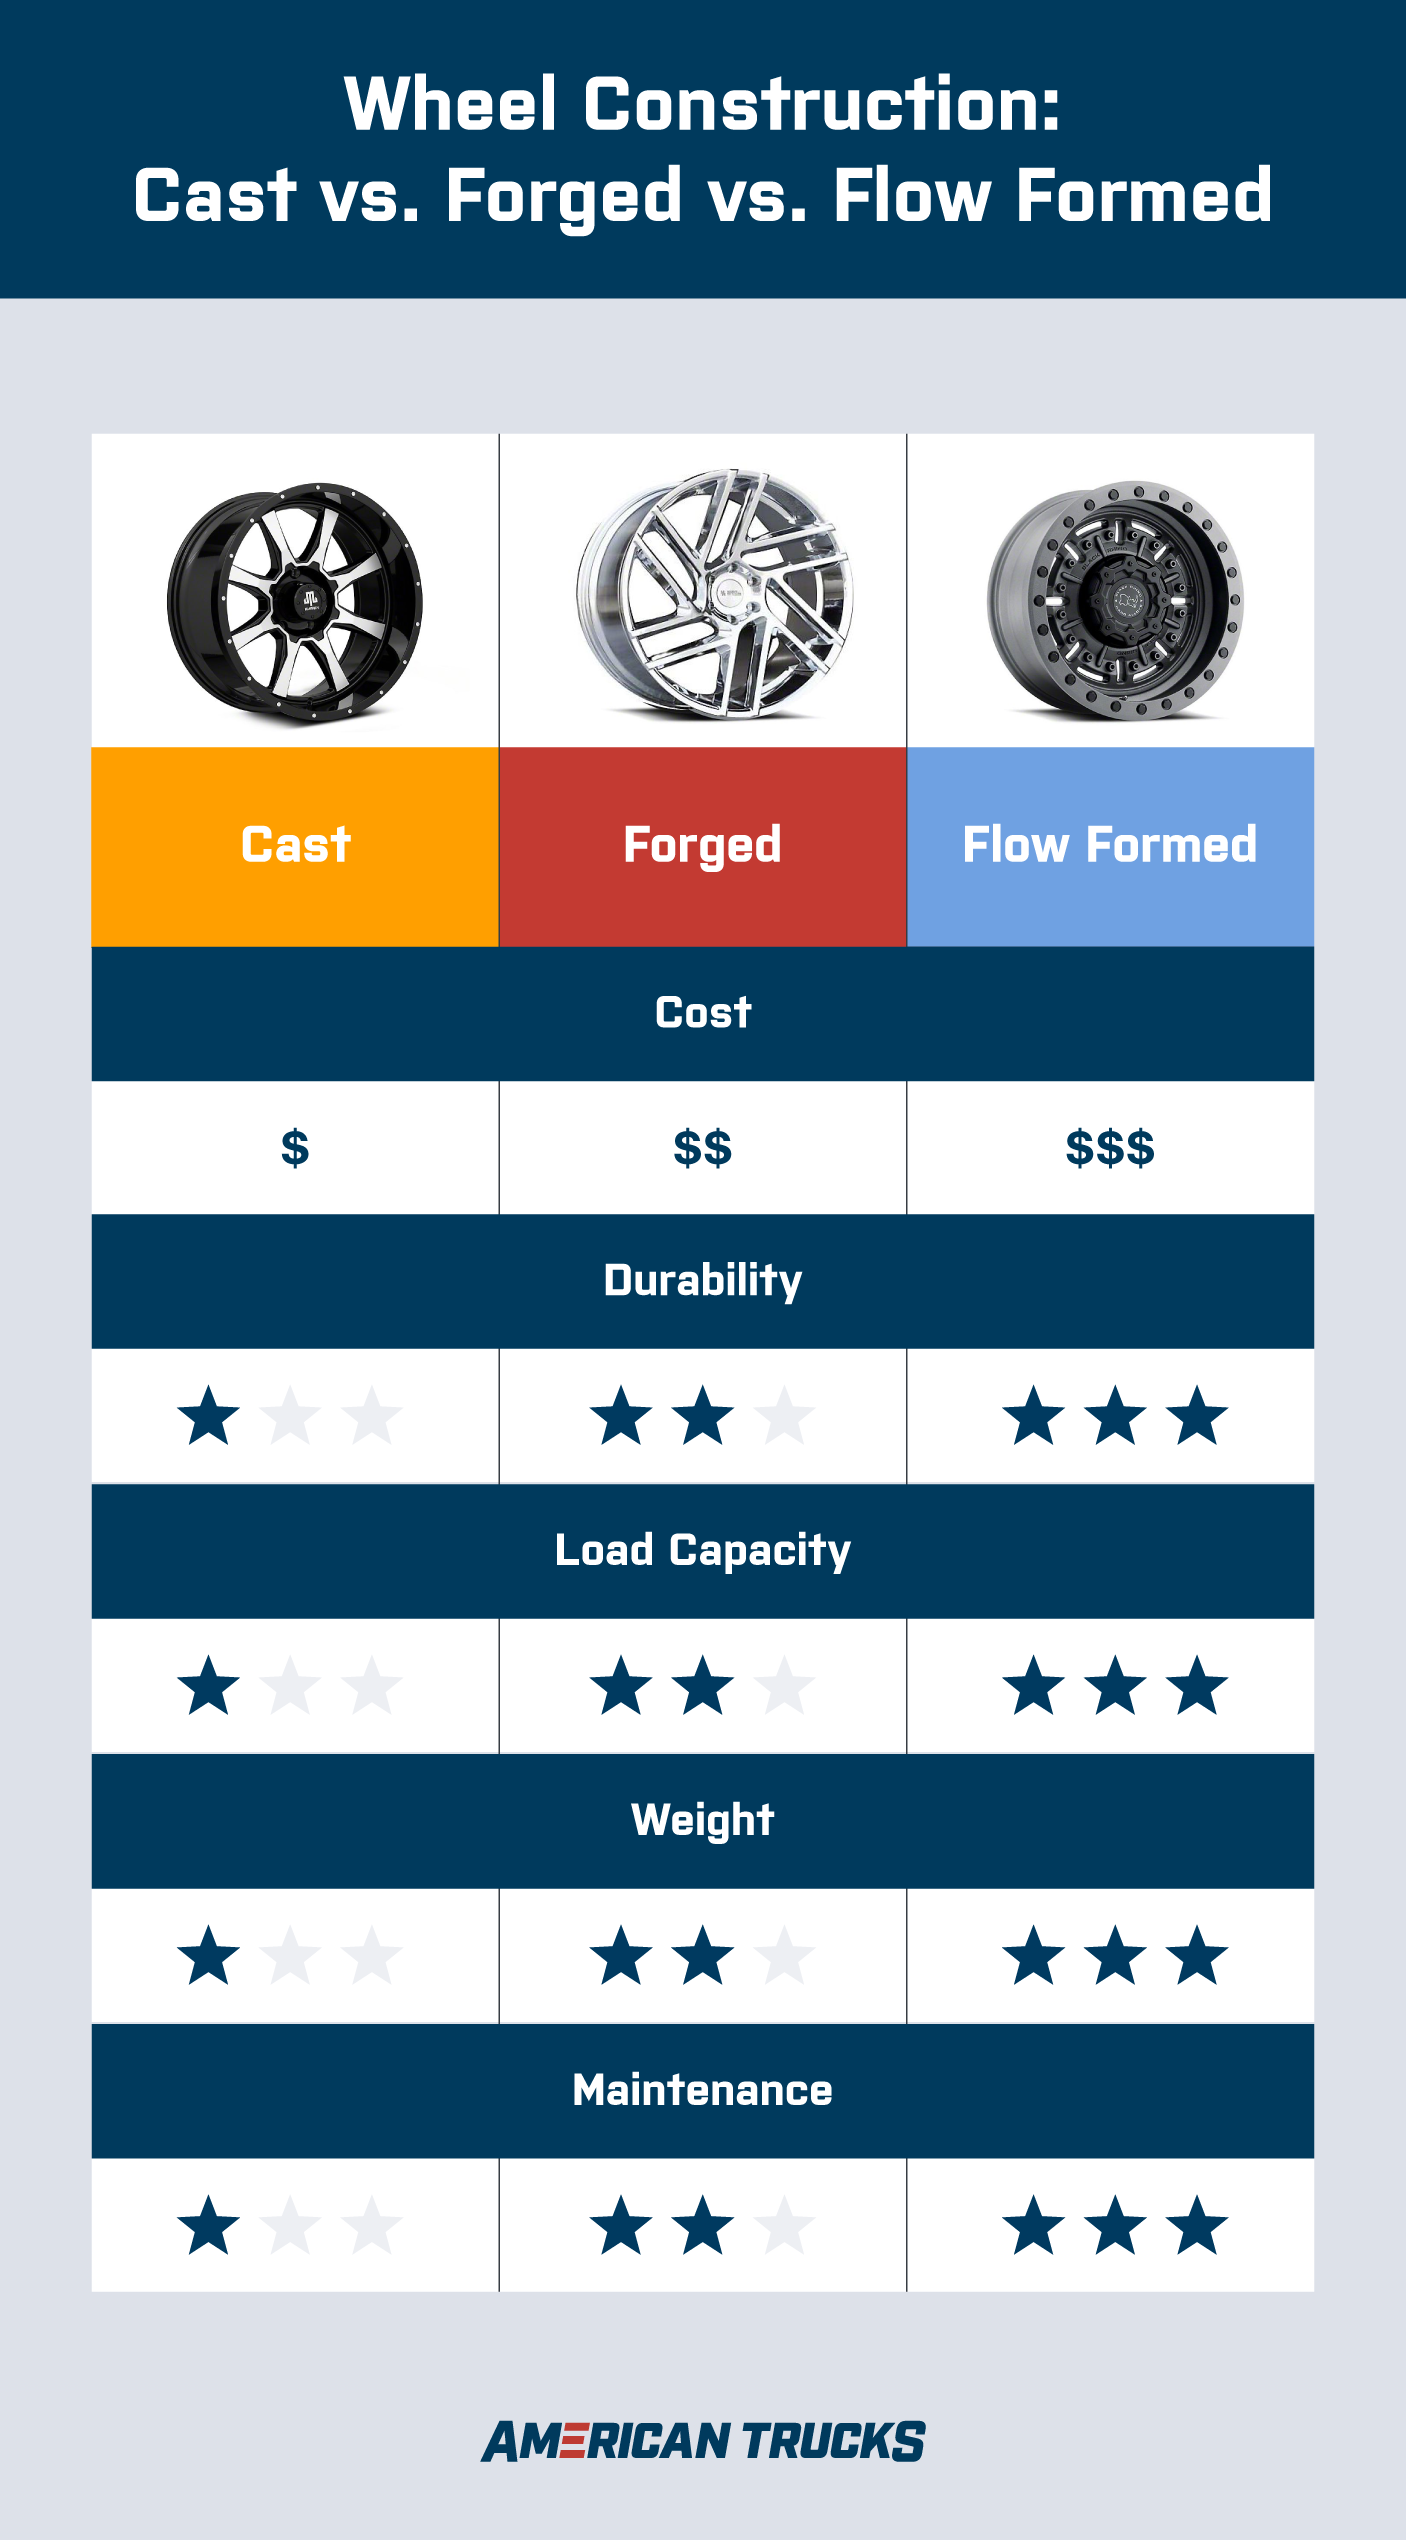 Table image comparing the cost, durability load capacity, weight and maintenance of cast forged and flow formed wheel constructions